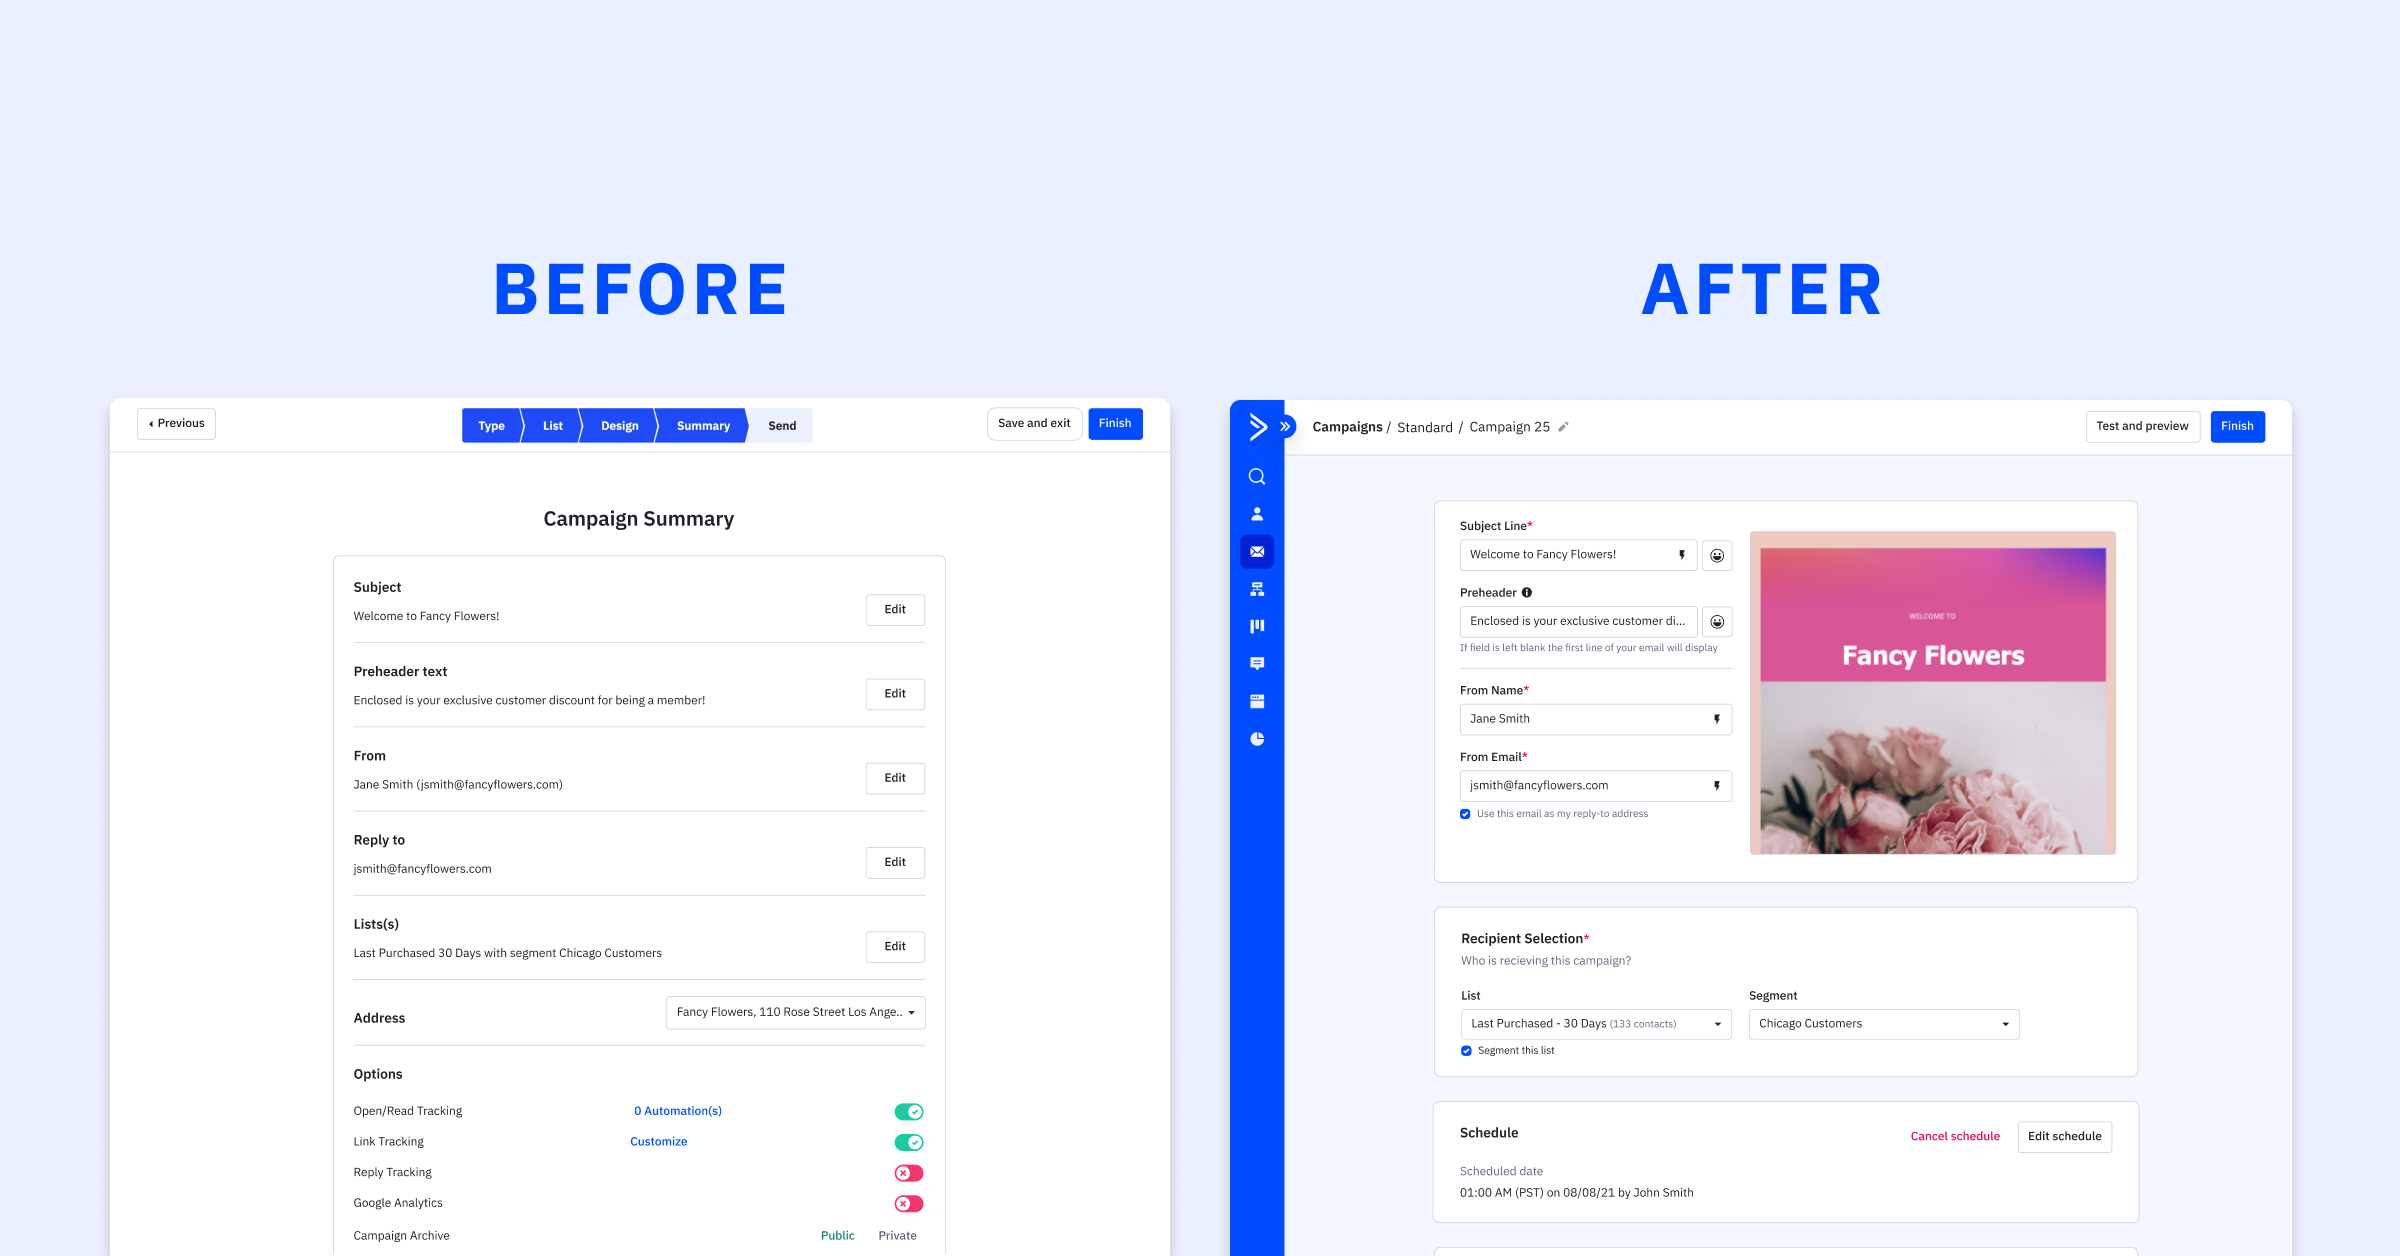 A look before and after the new campaign workflow